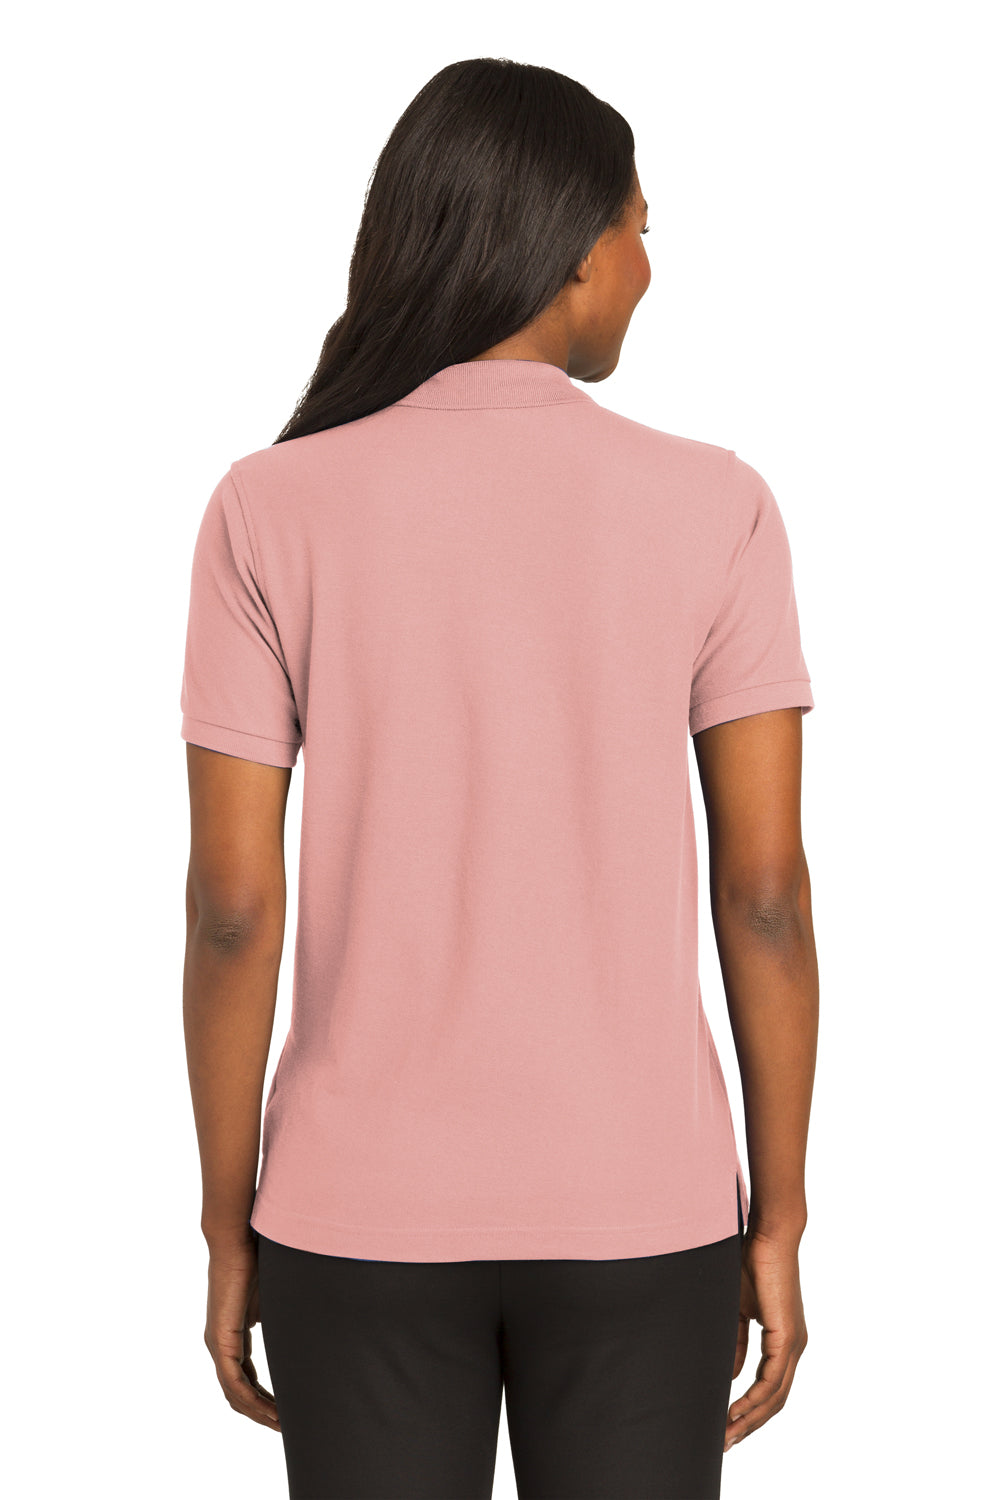 Port Authority L500 Womens Silk Touch Wrinkle Resistant Short Sleeve Polo Shirt Light Pink Back